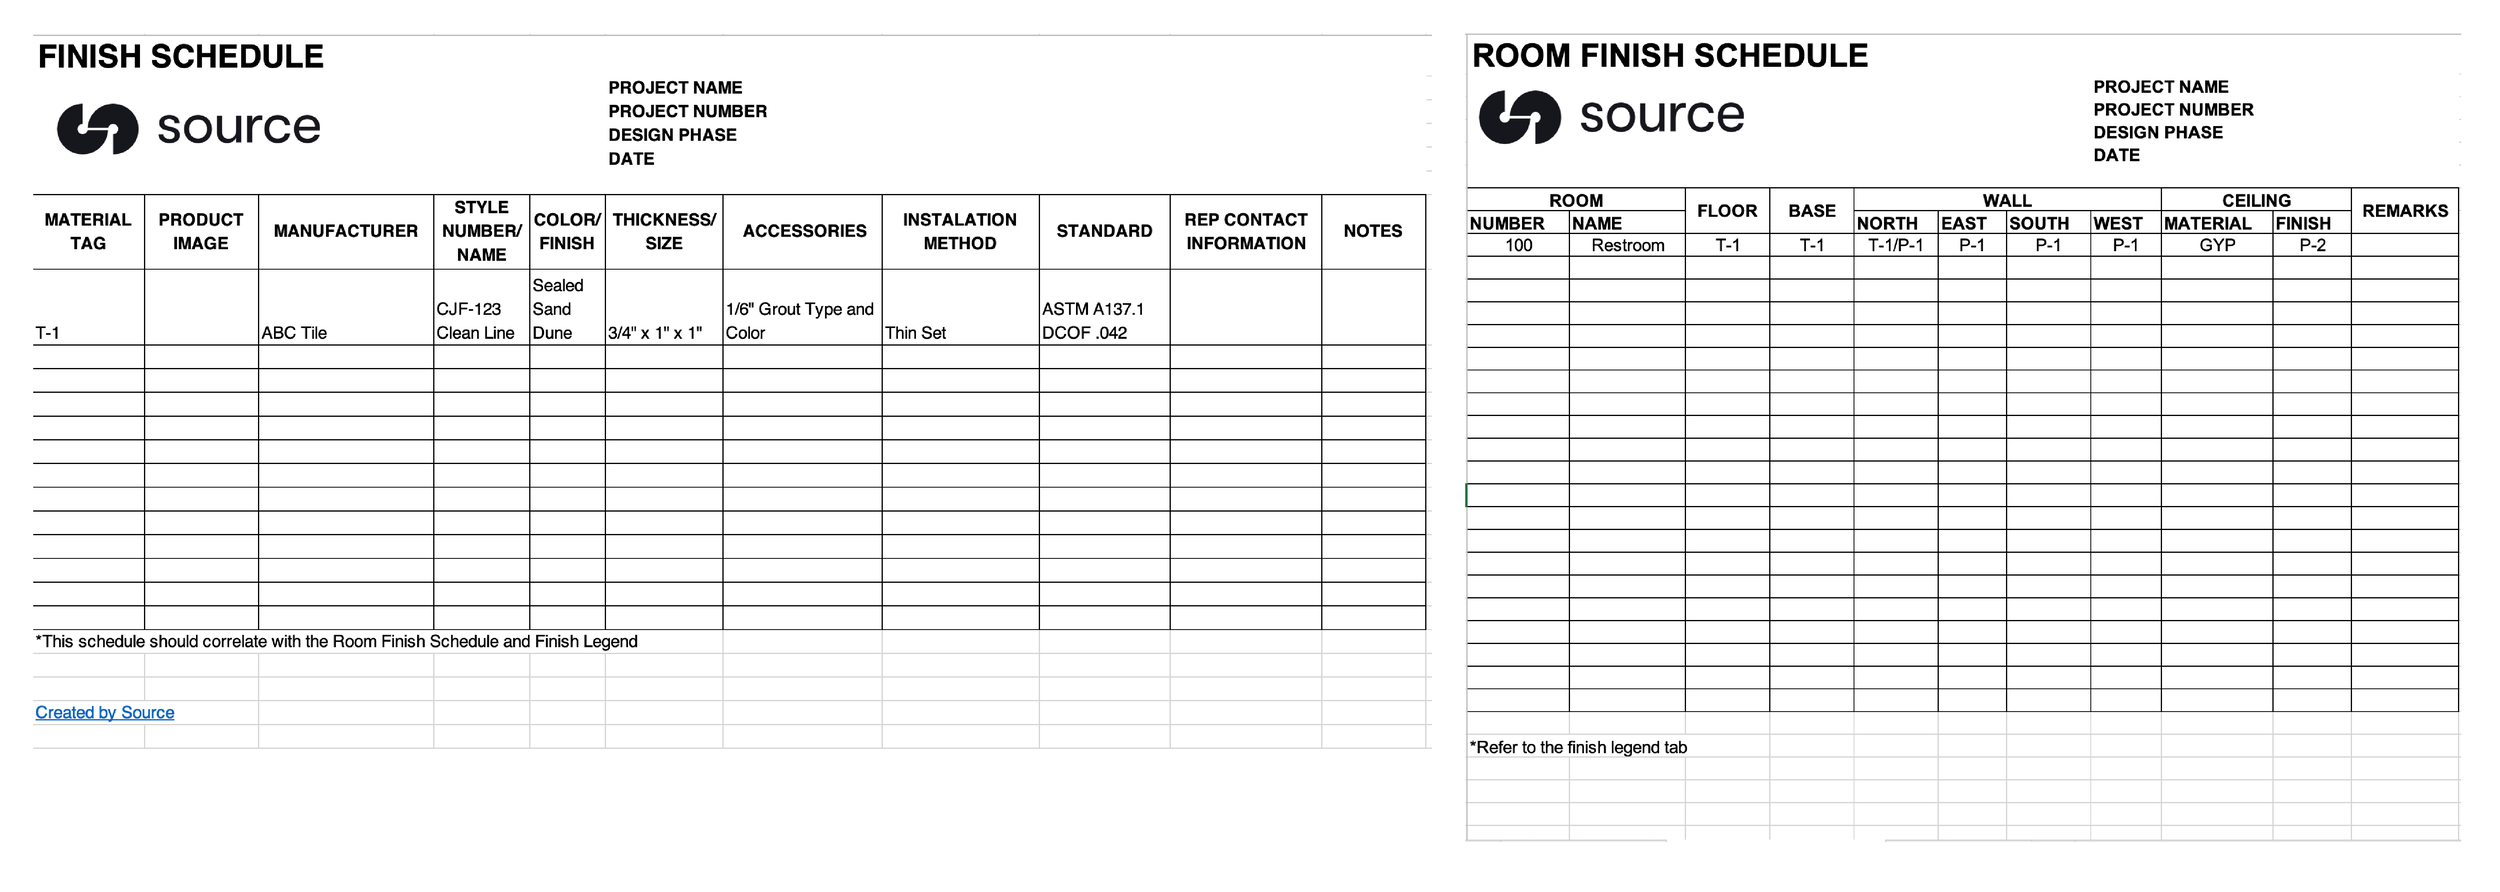 finish-schedule-template-for-more-accurate-documentation